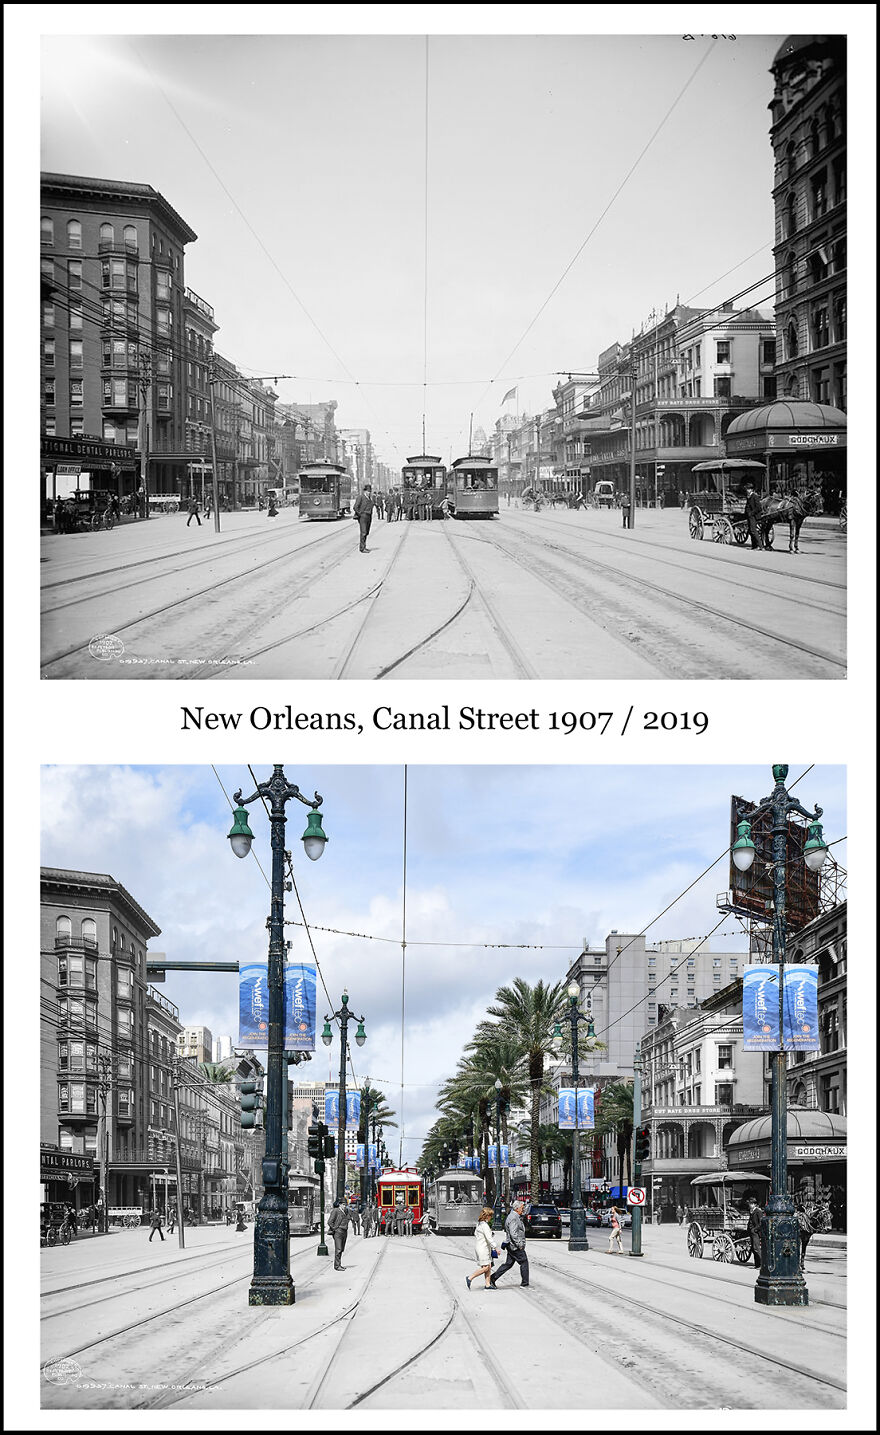 New Orleans, Canal Street 1907 / 2019